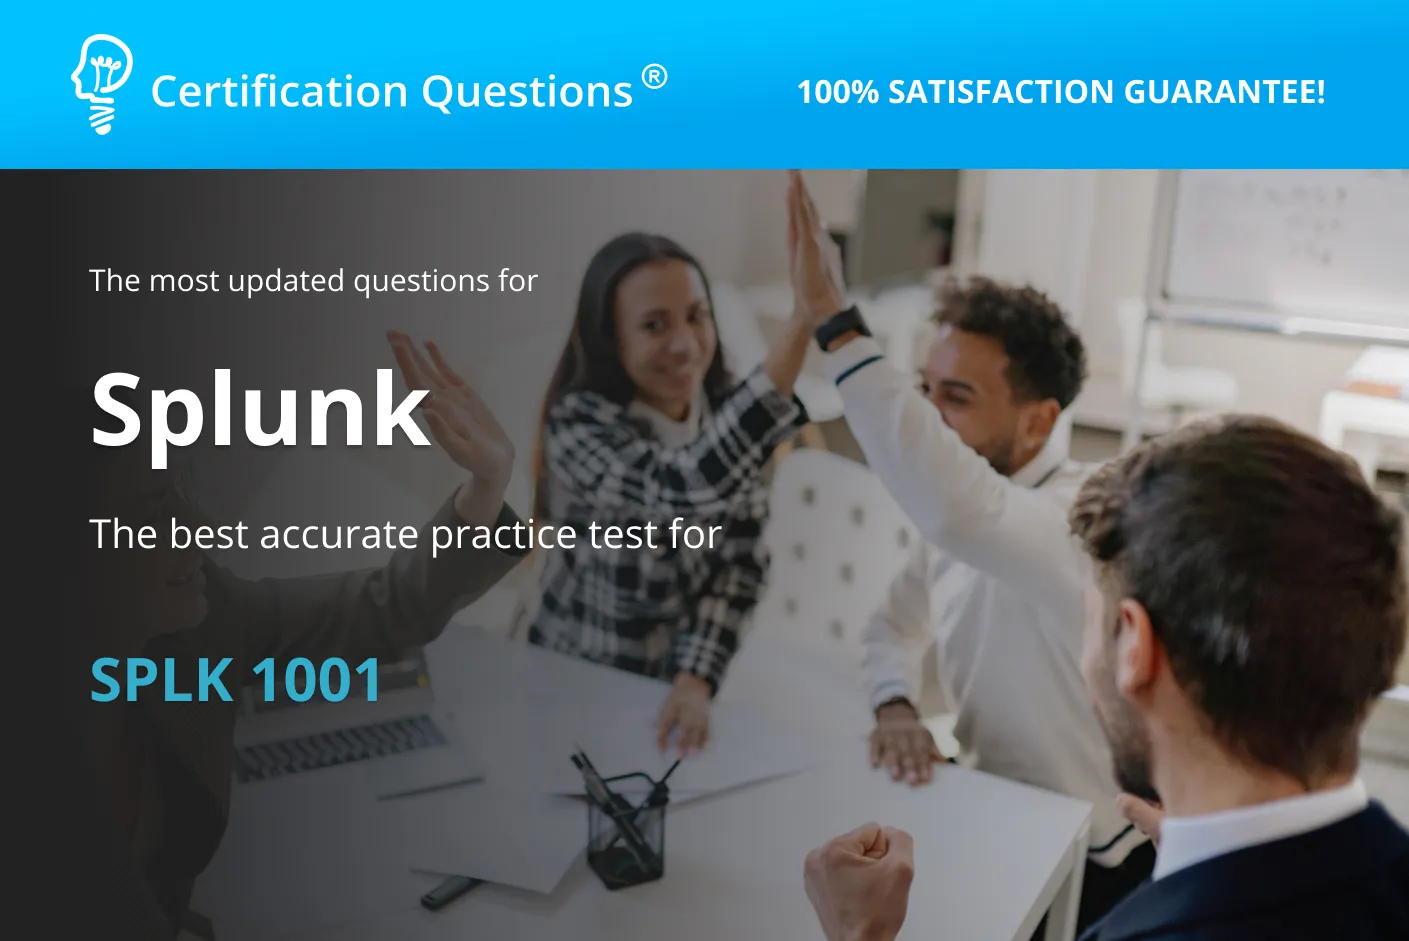 Here is the image for the Splunk Core Certified User exam in the United States of America.